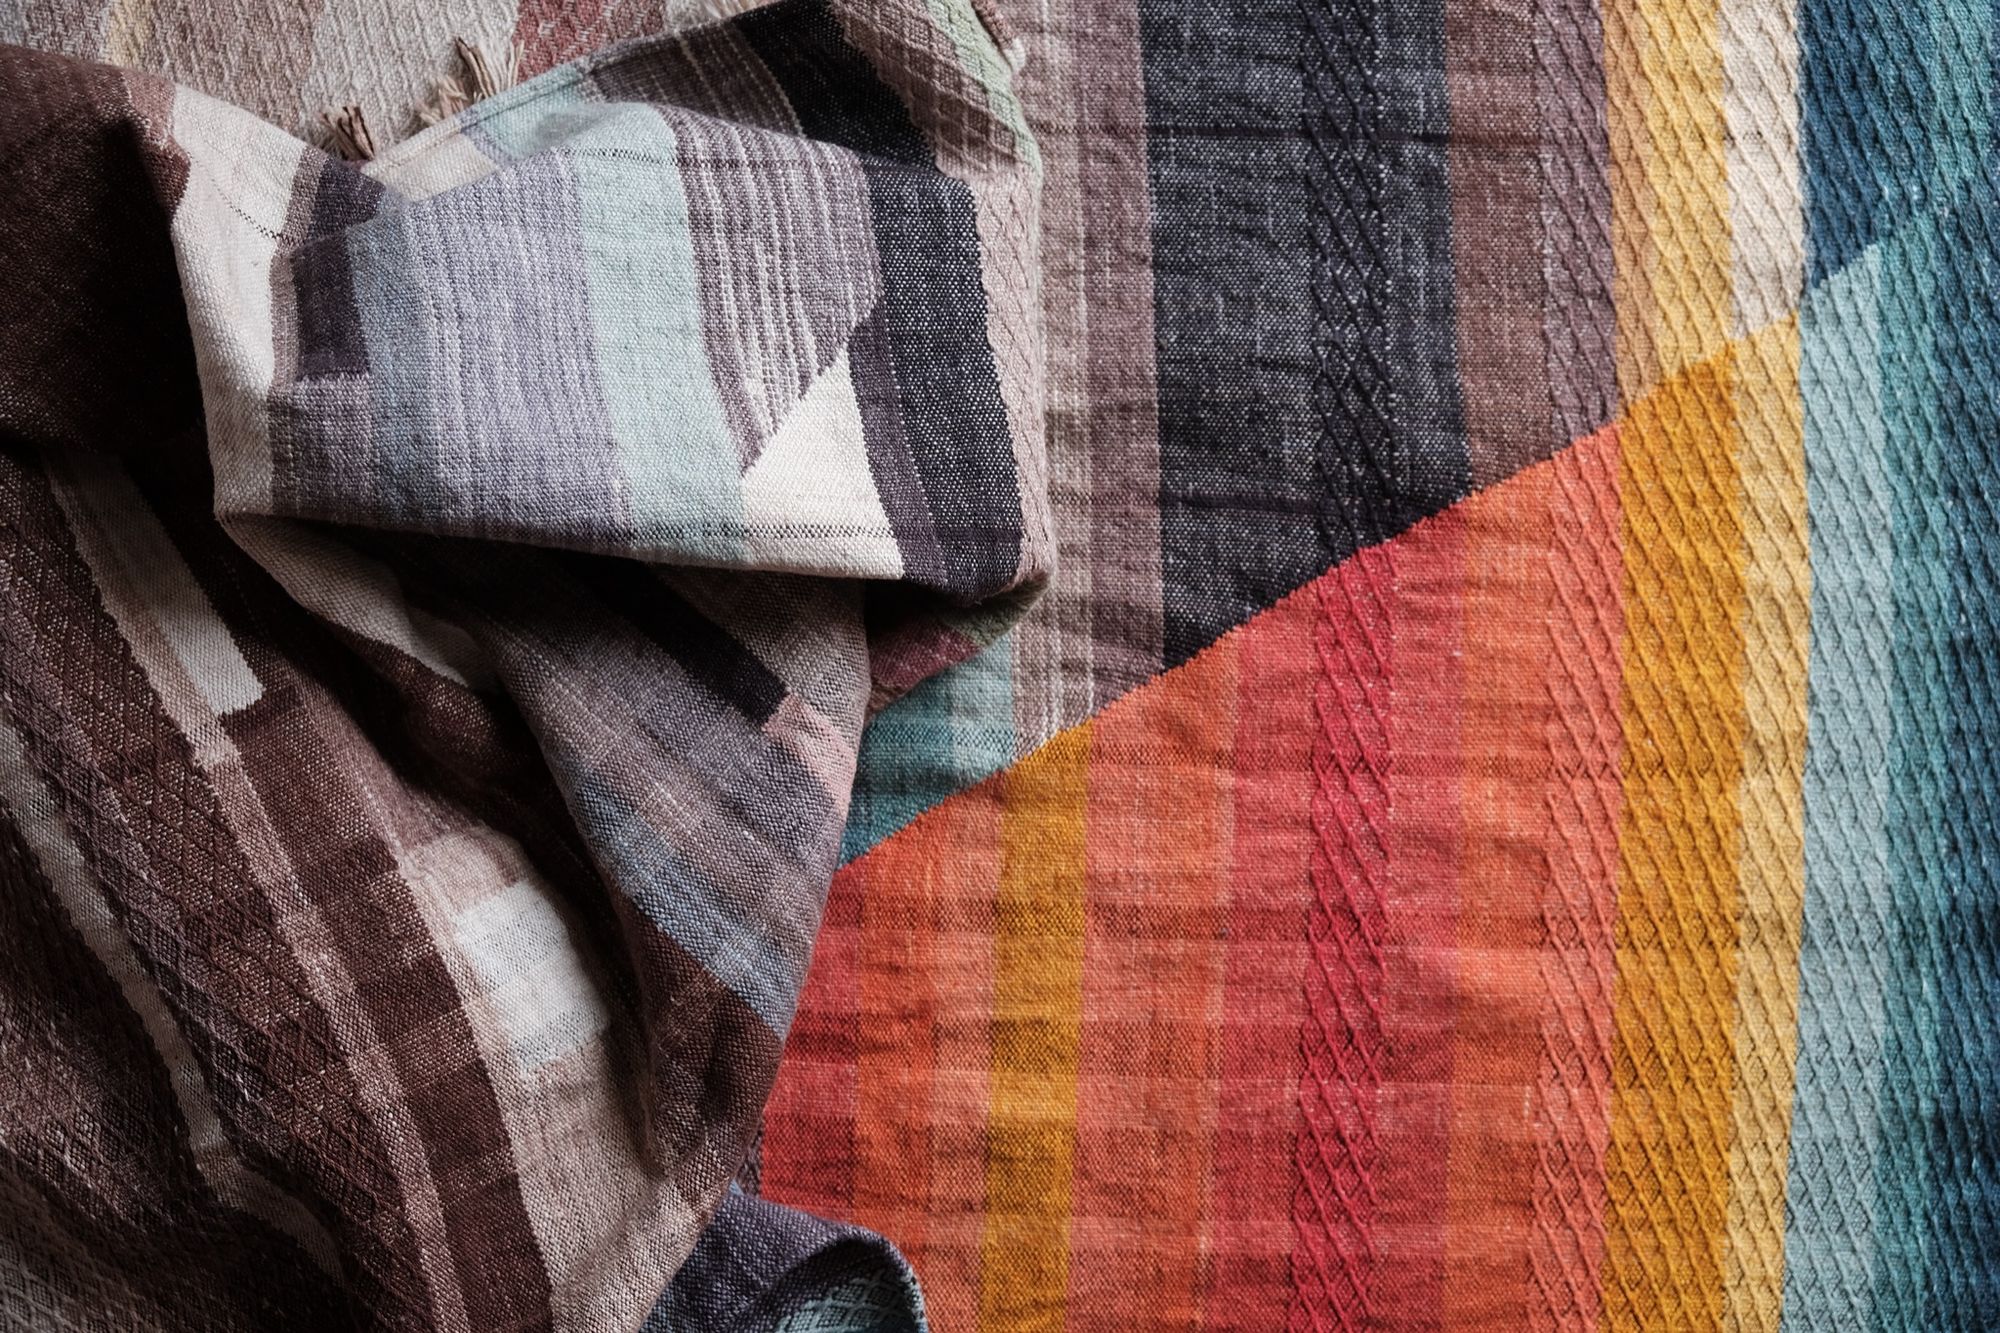 Handwoven fabric with geometric designs of brown, black, grey, red, orange, yellow and blue